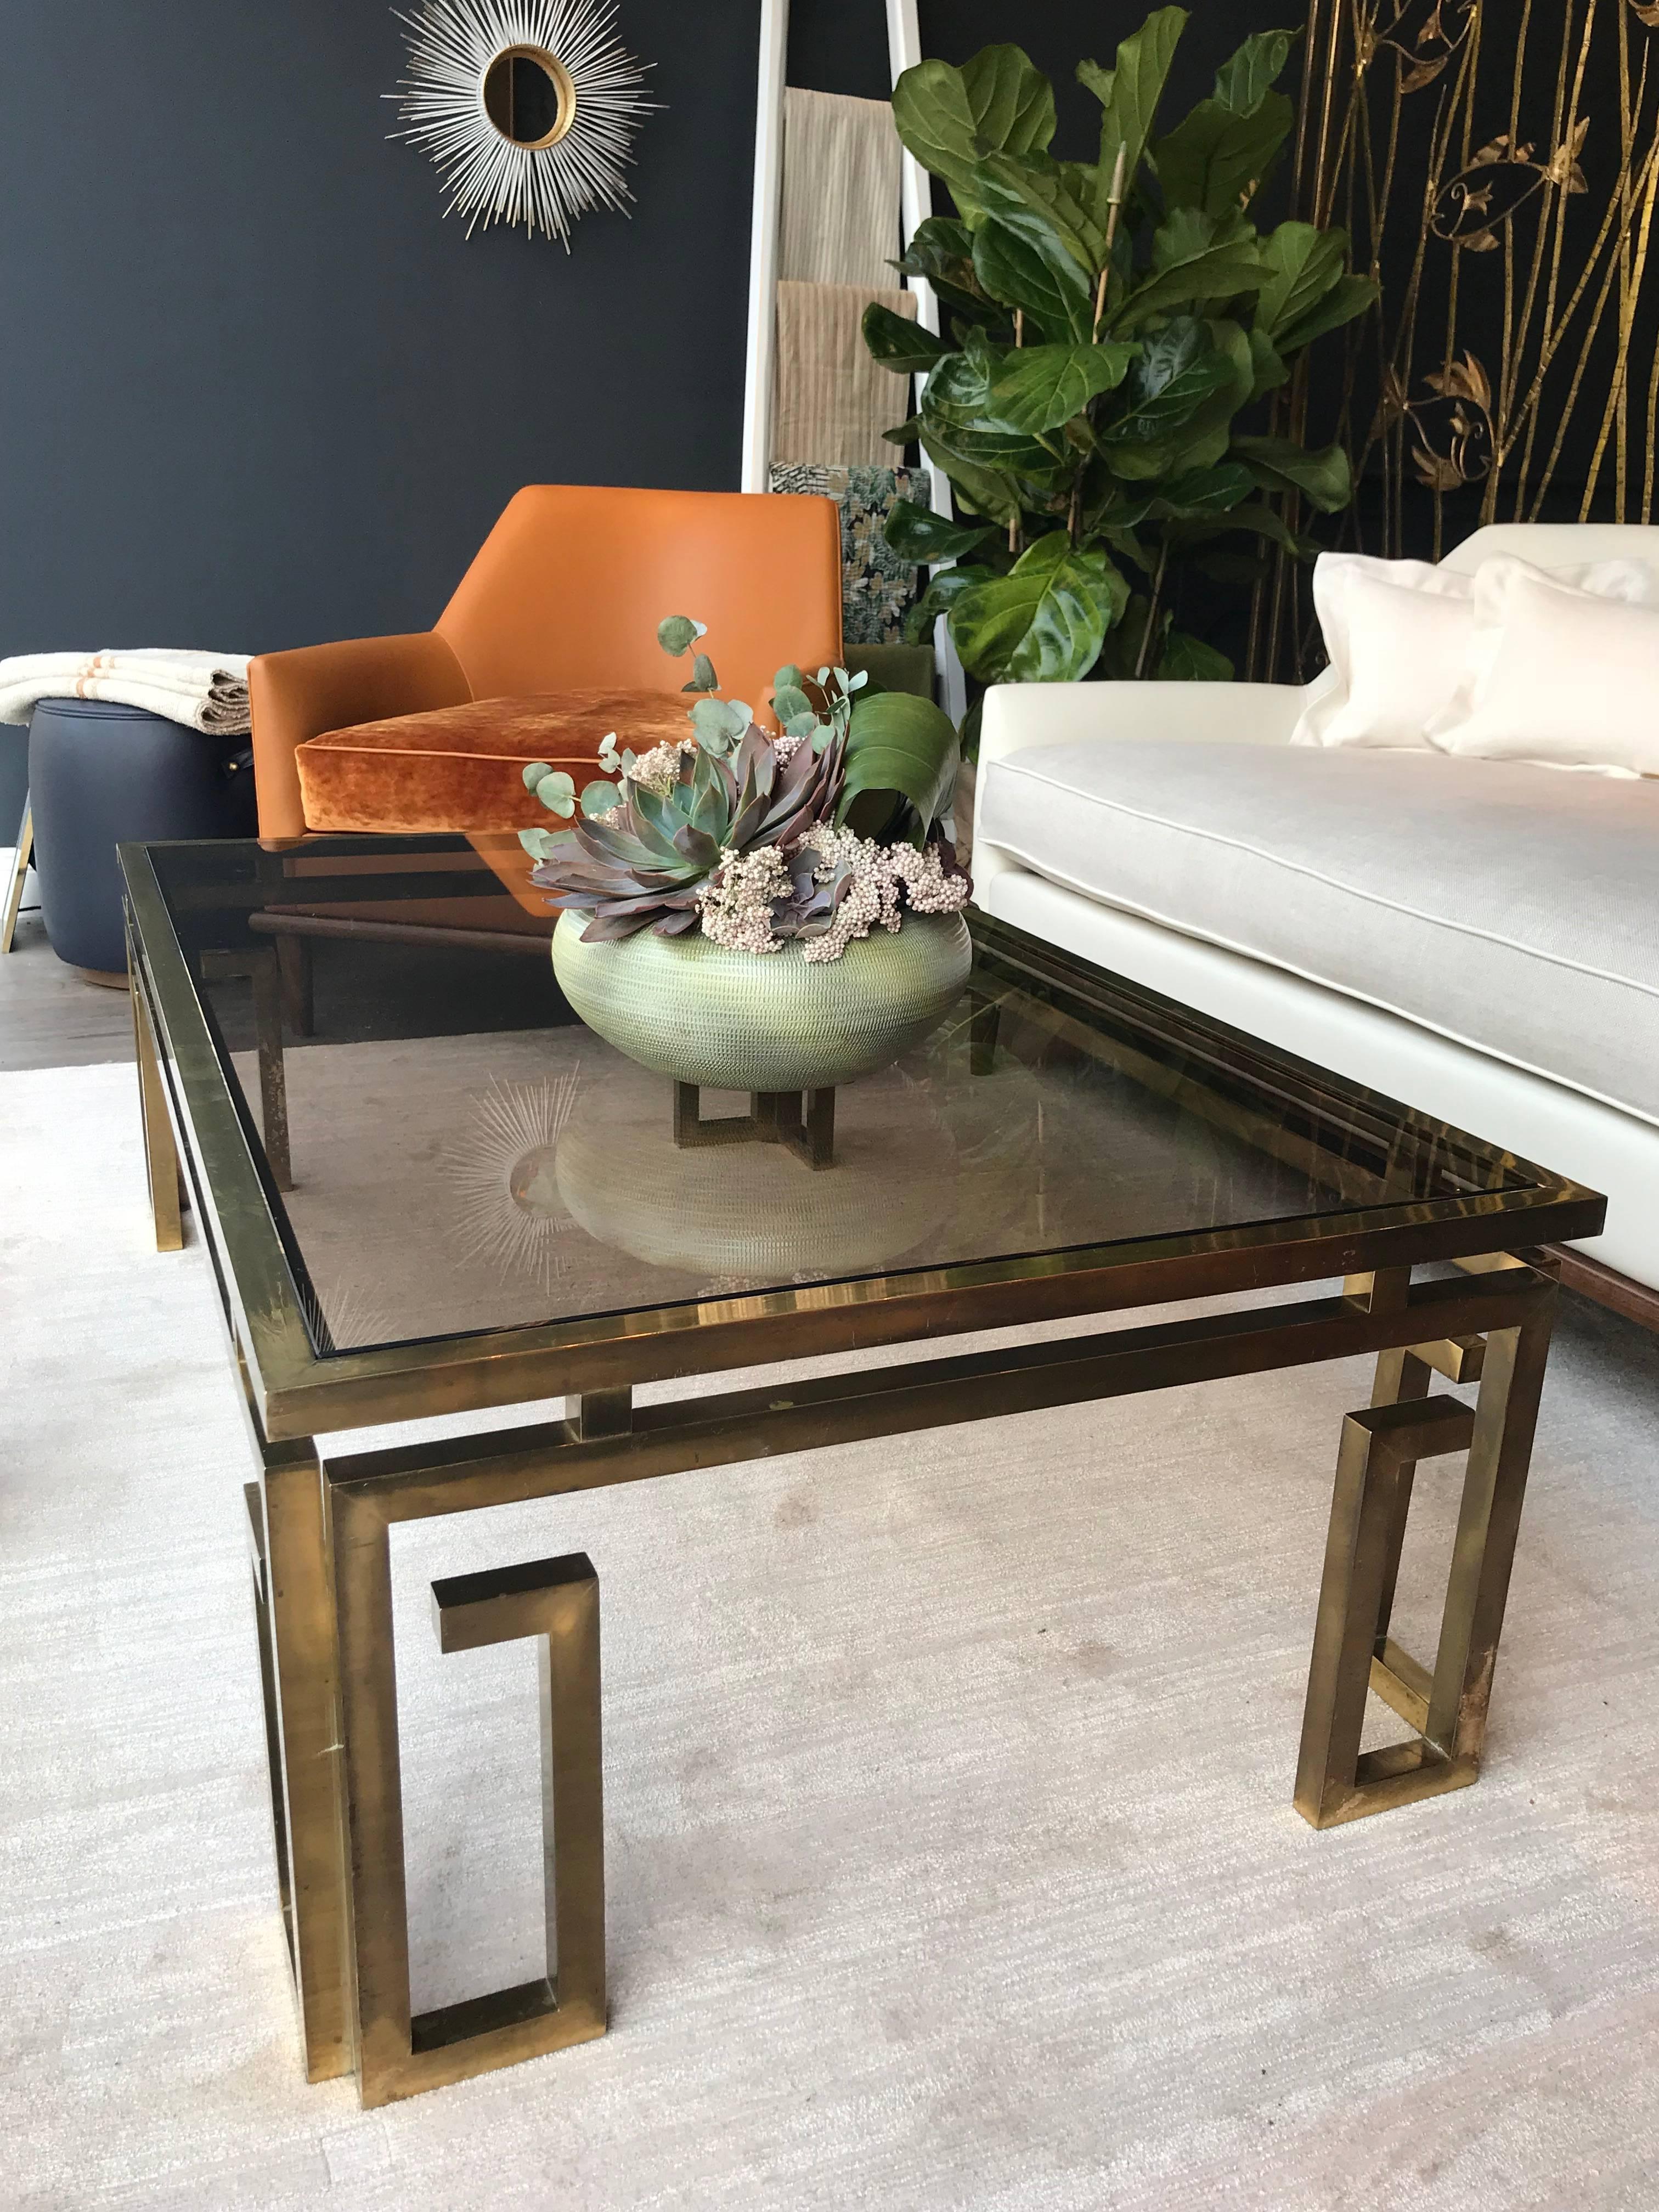 An Italian brass coffee table with ornate Greek key legs and smoked glass top.